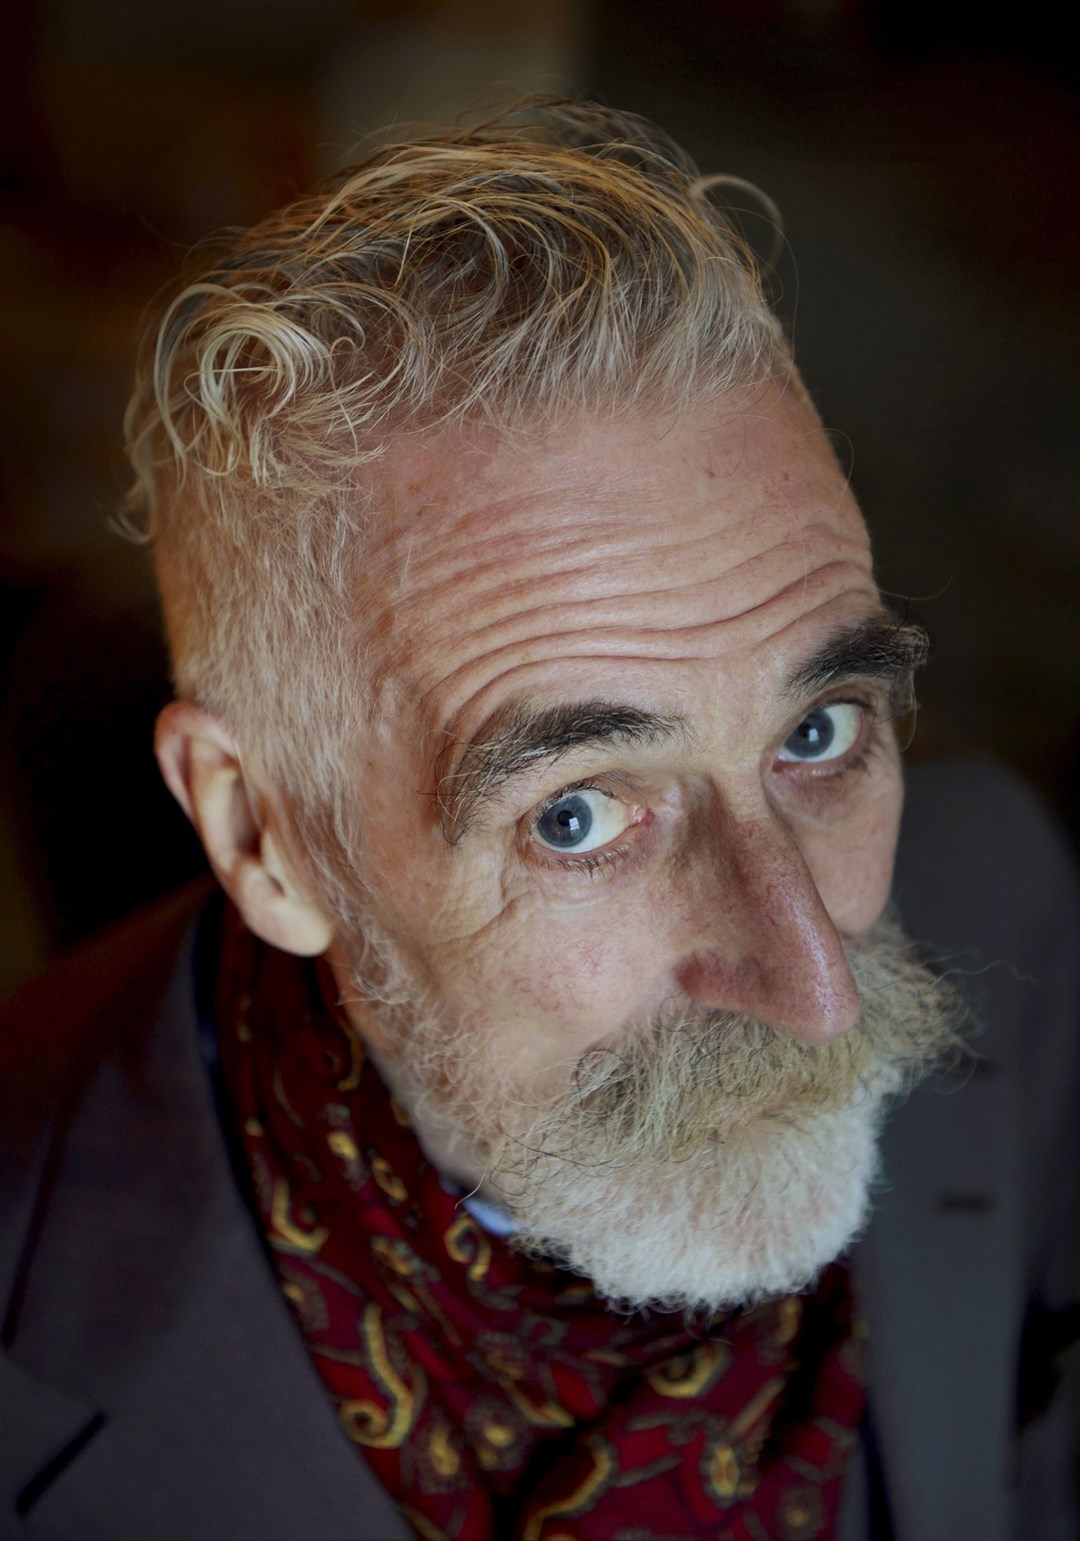 The work of Highland-based artist and writer John Byrne, who recently died, had a dramatic impact on Tony Black. Picture: Gary Anthony.